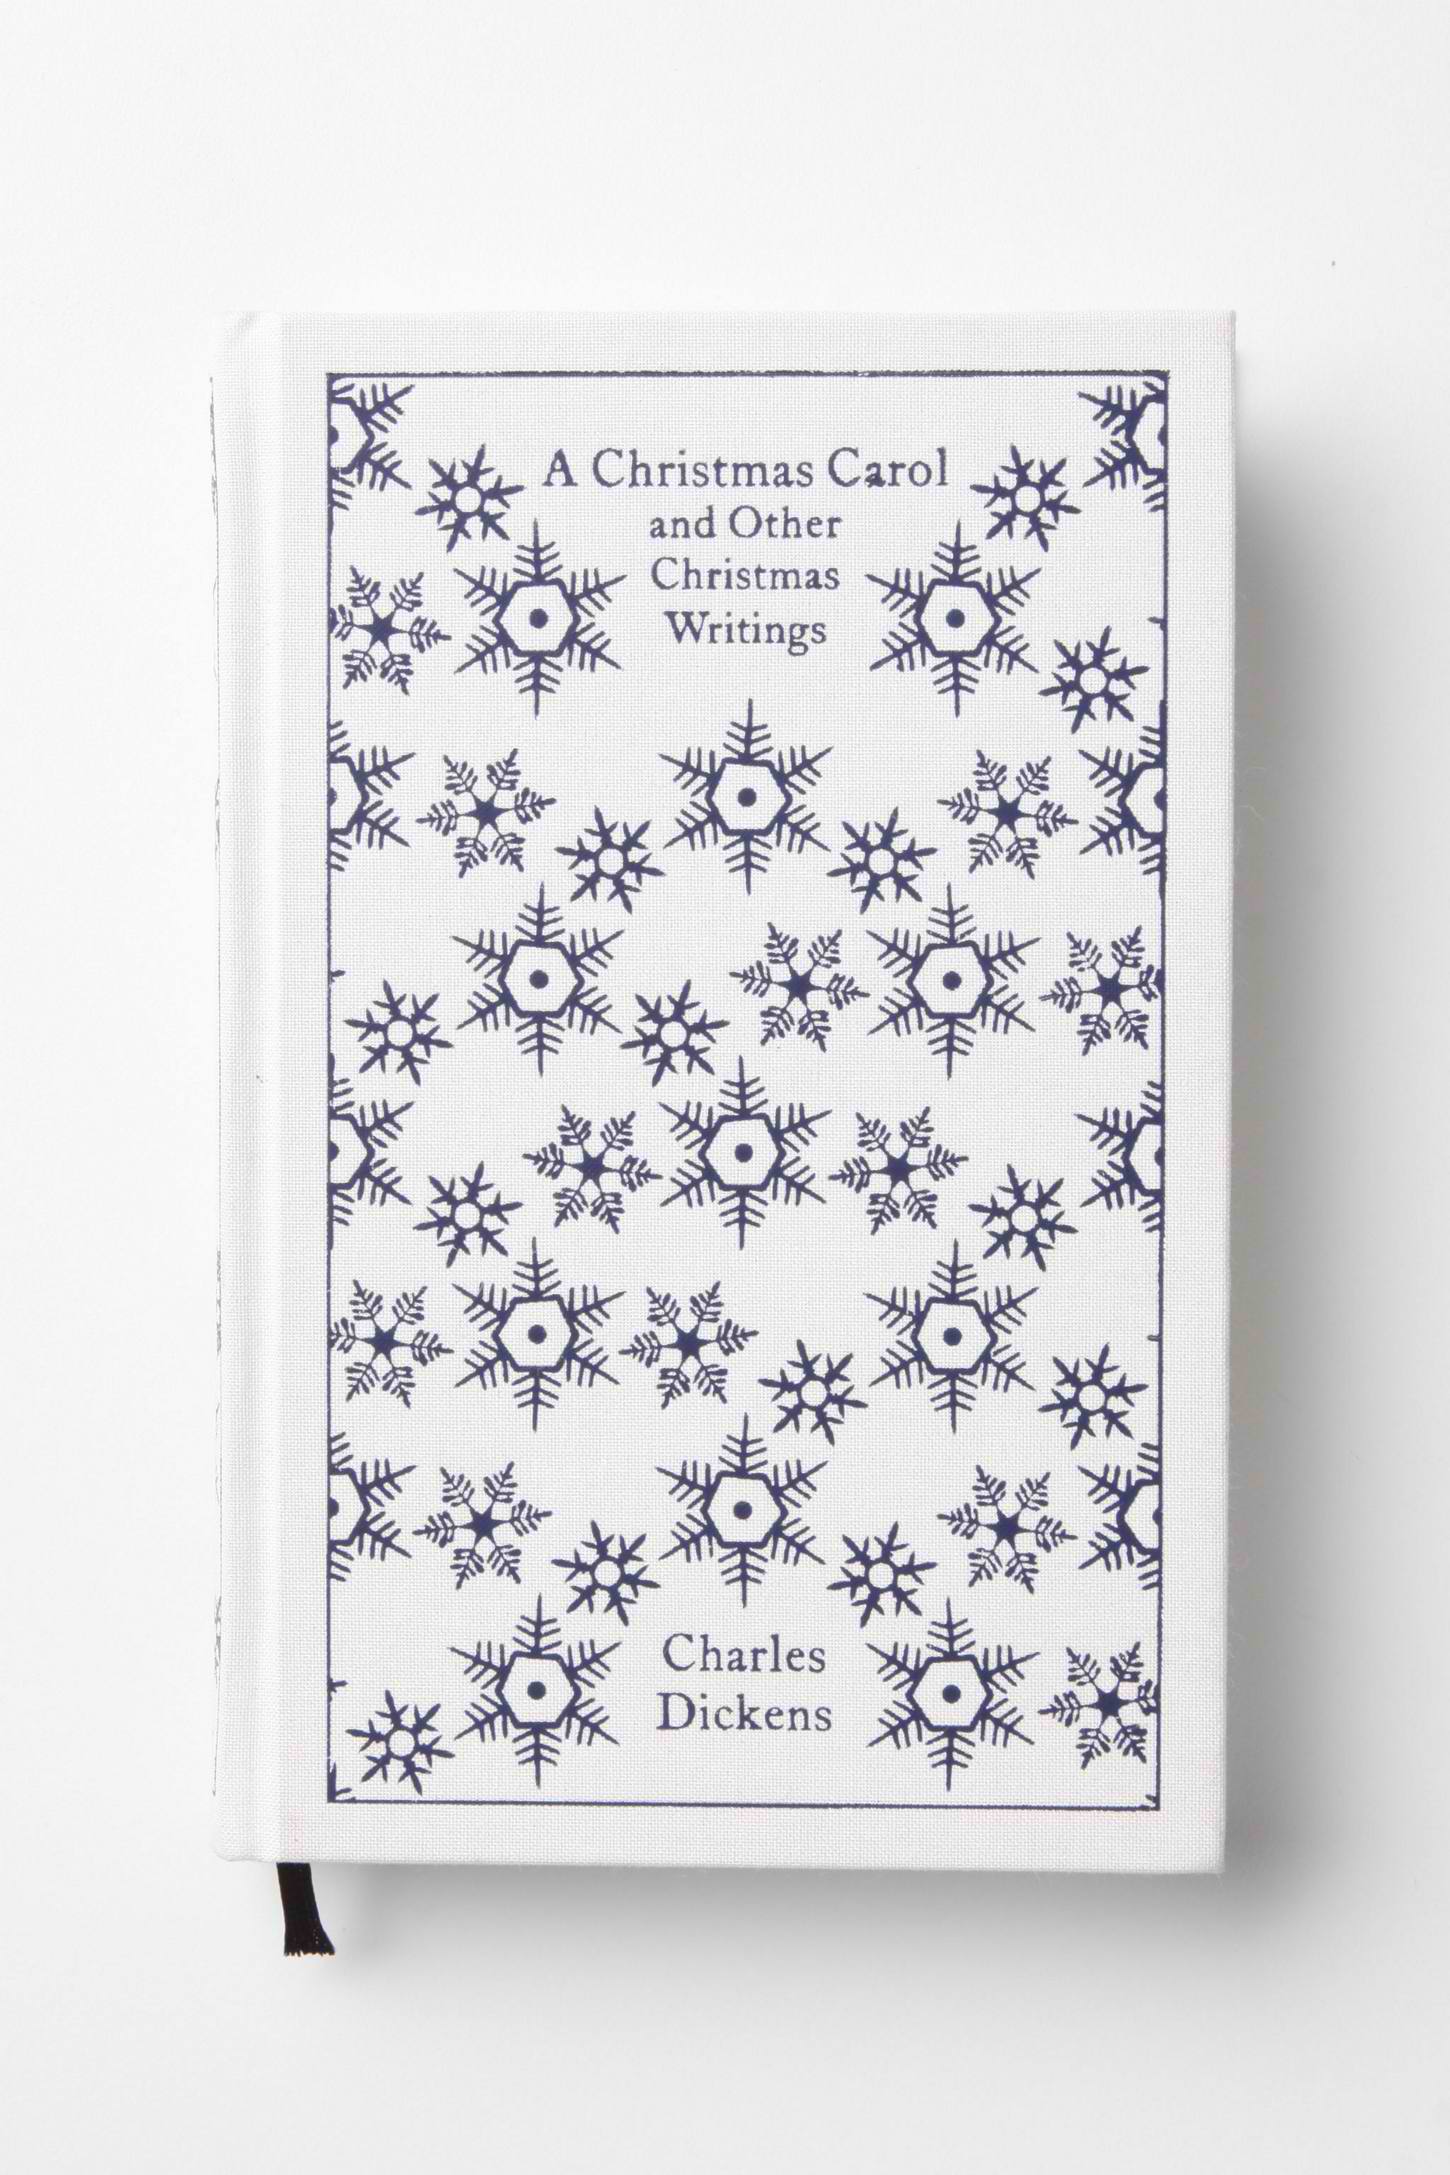 a christmas carol by charles dickens - penguin classics edition